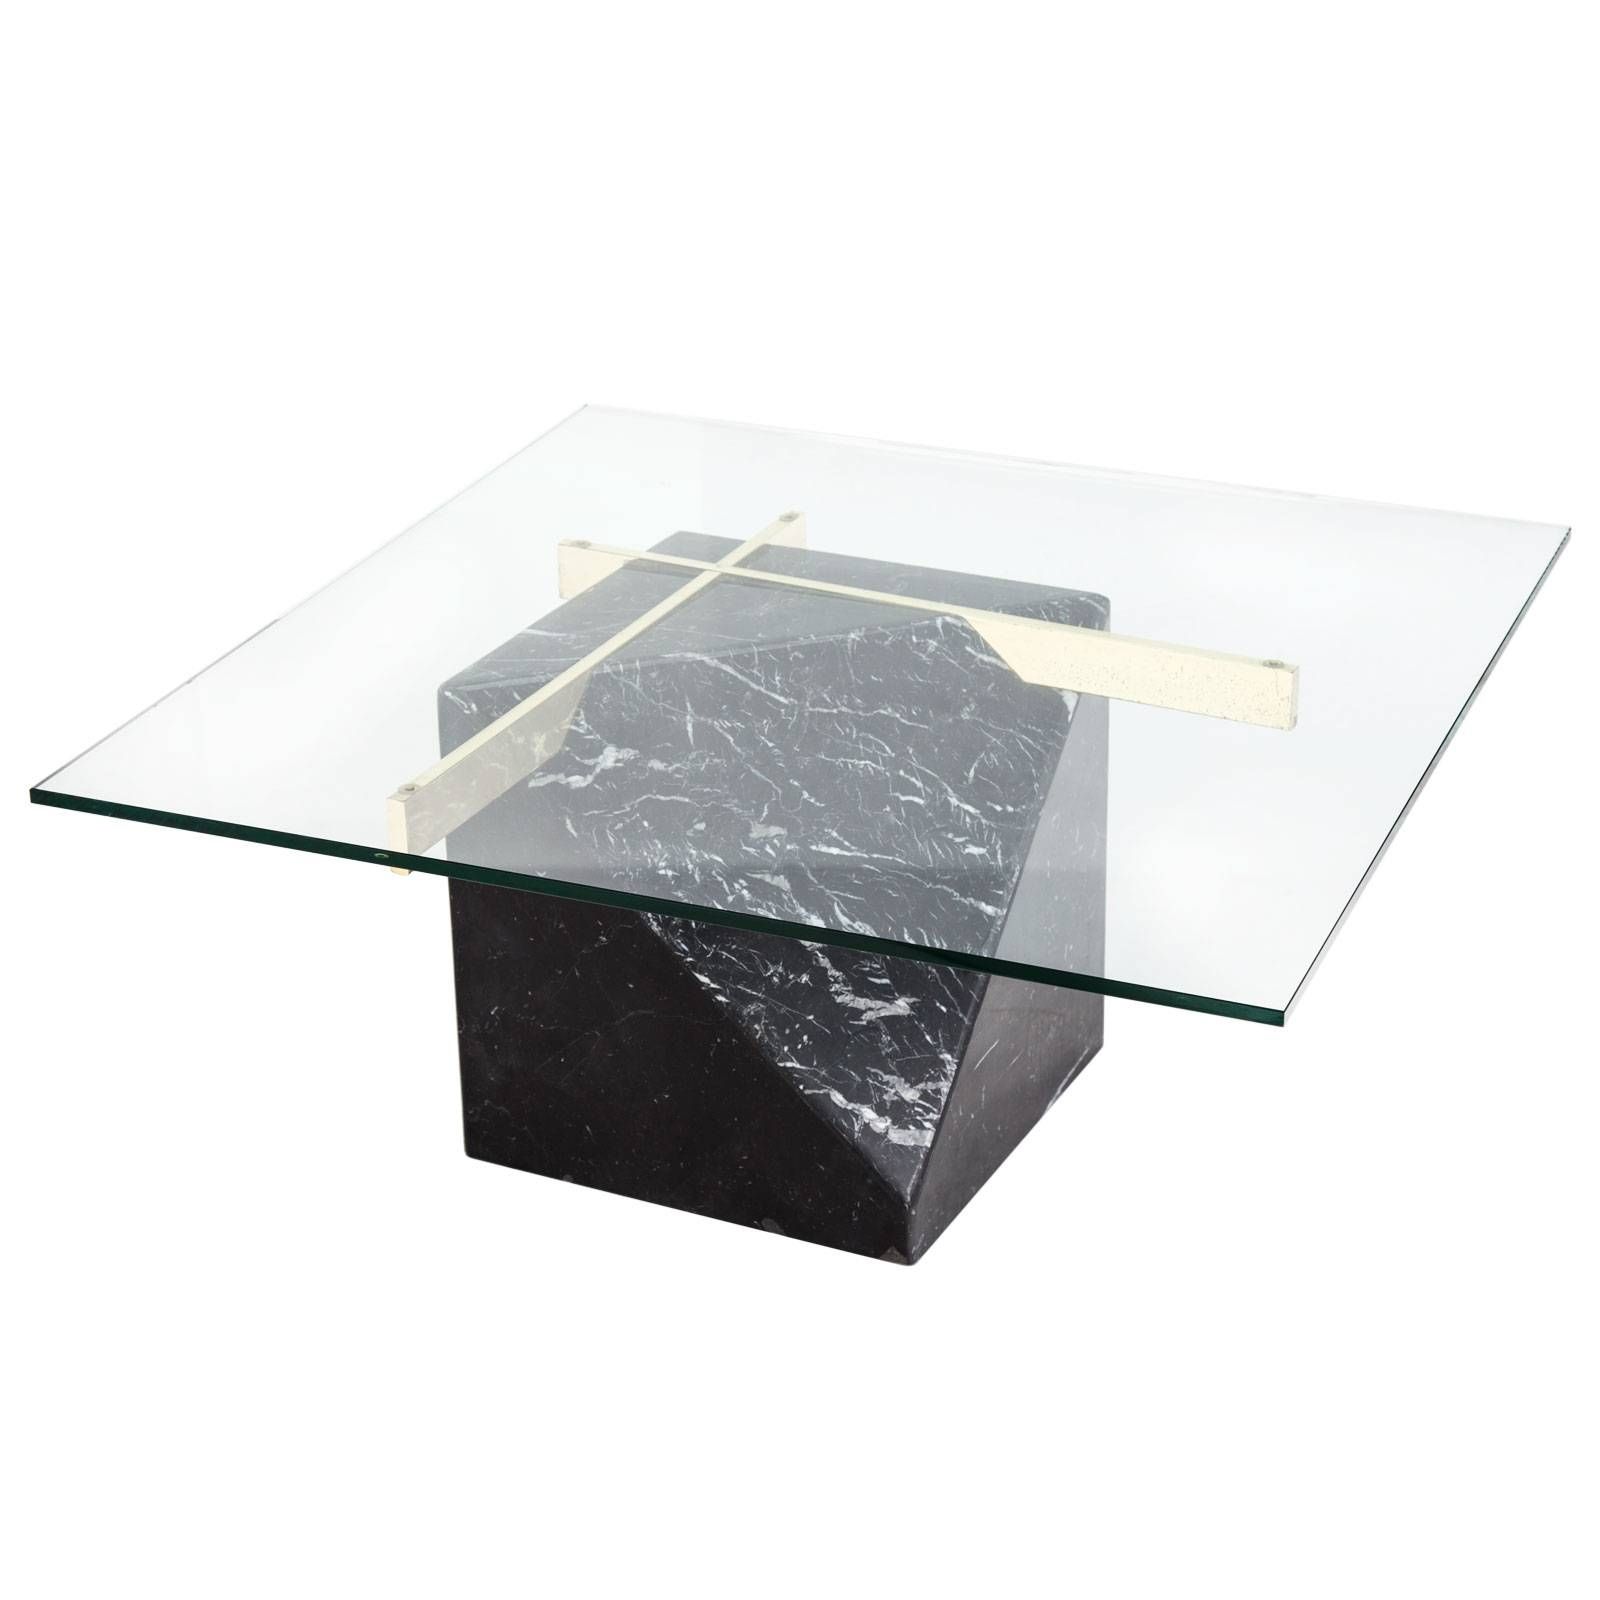 Artedi Marble Coffee Table Rentals | Event Furniture Rentals With Regard To Black And Grey Marble Coffee Tables (View 11 of 30)